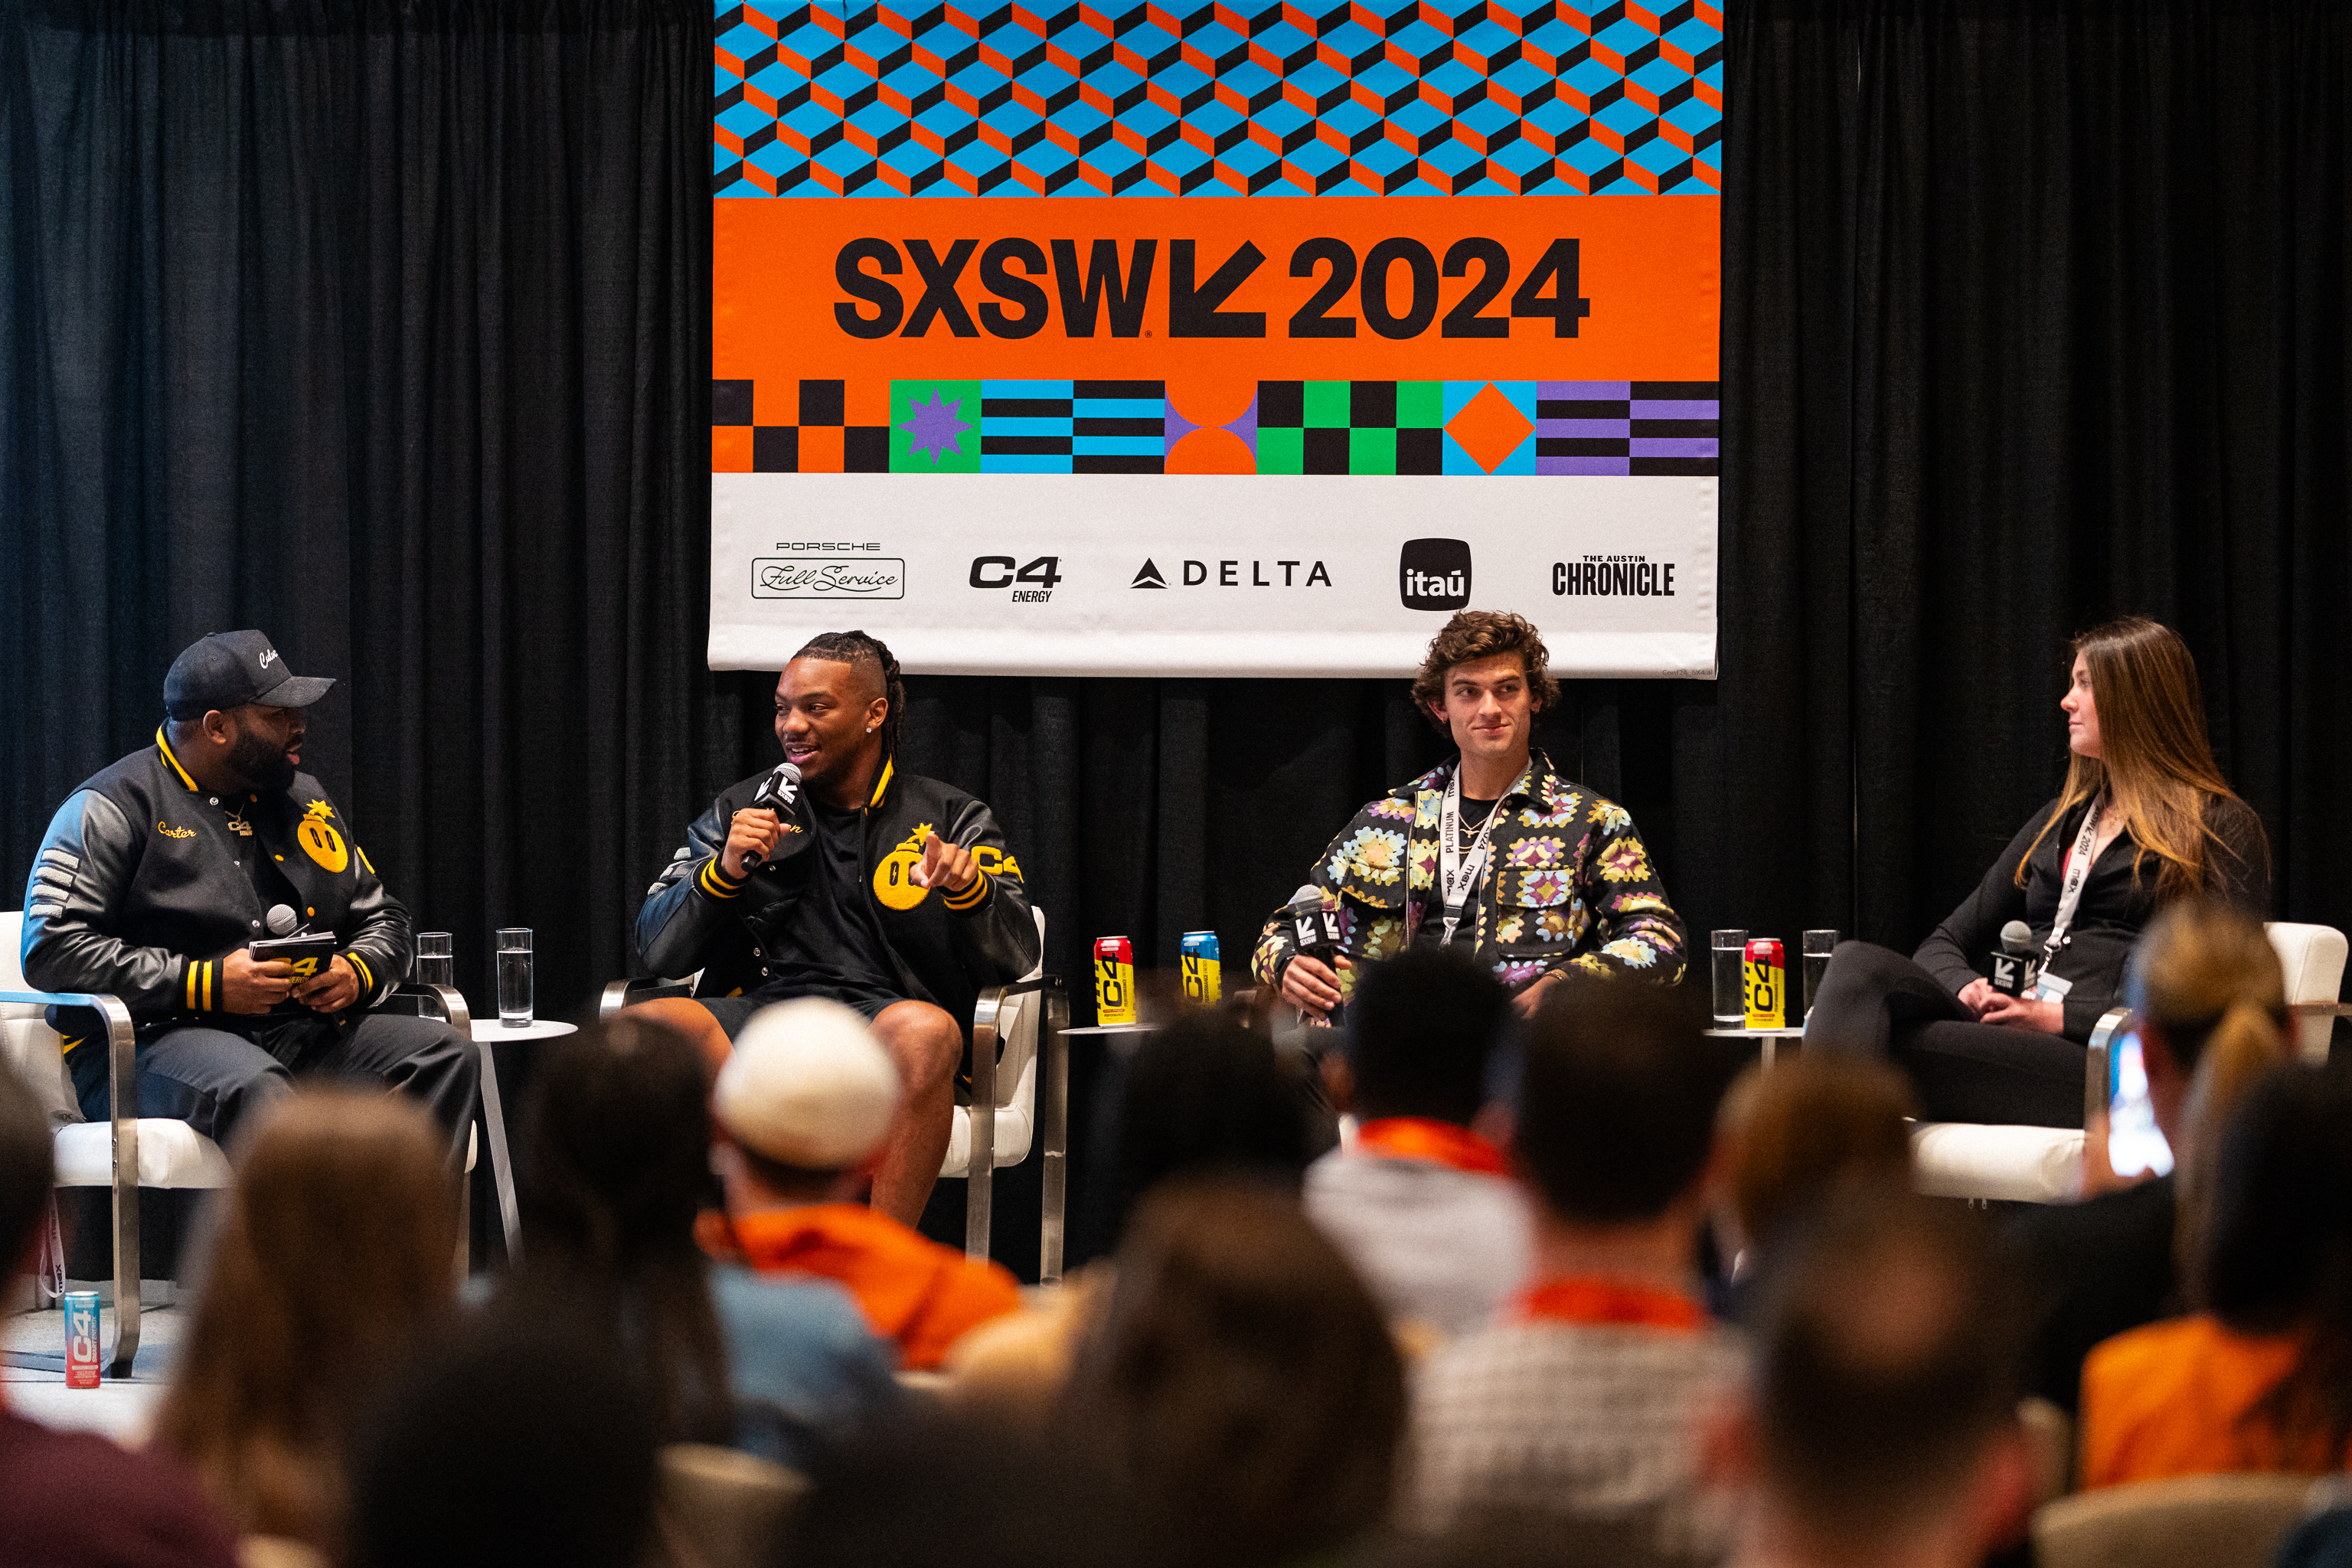 Four panelists at SXSW 2024, seated, engaged in a discussion in front of an audience